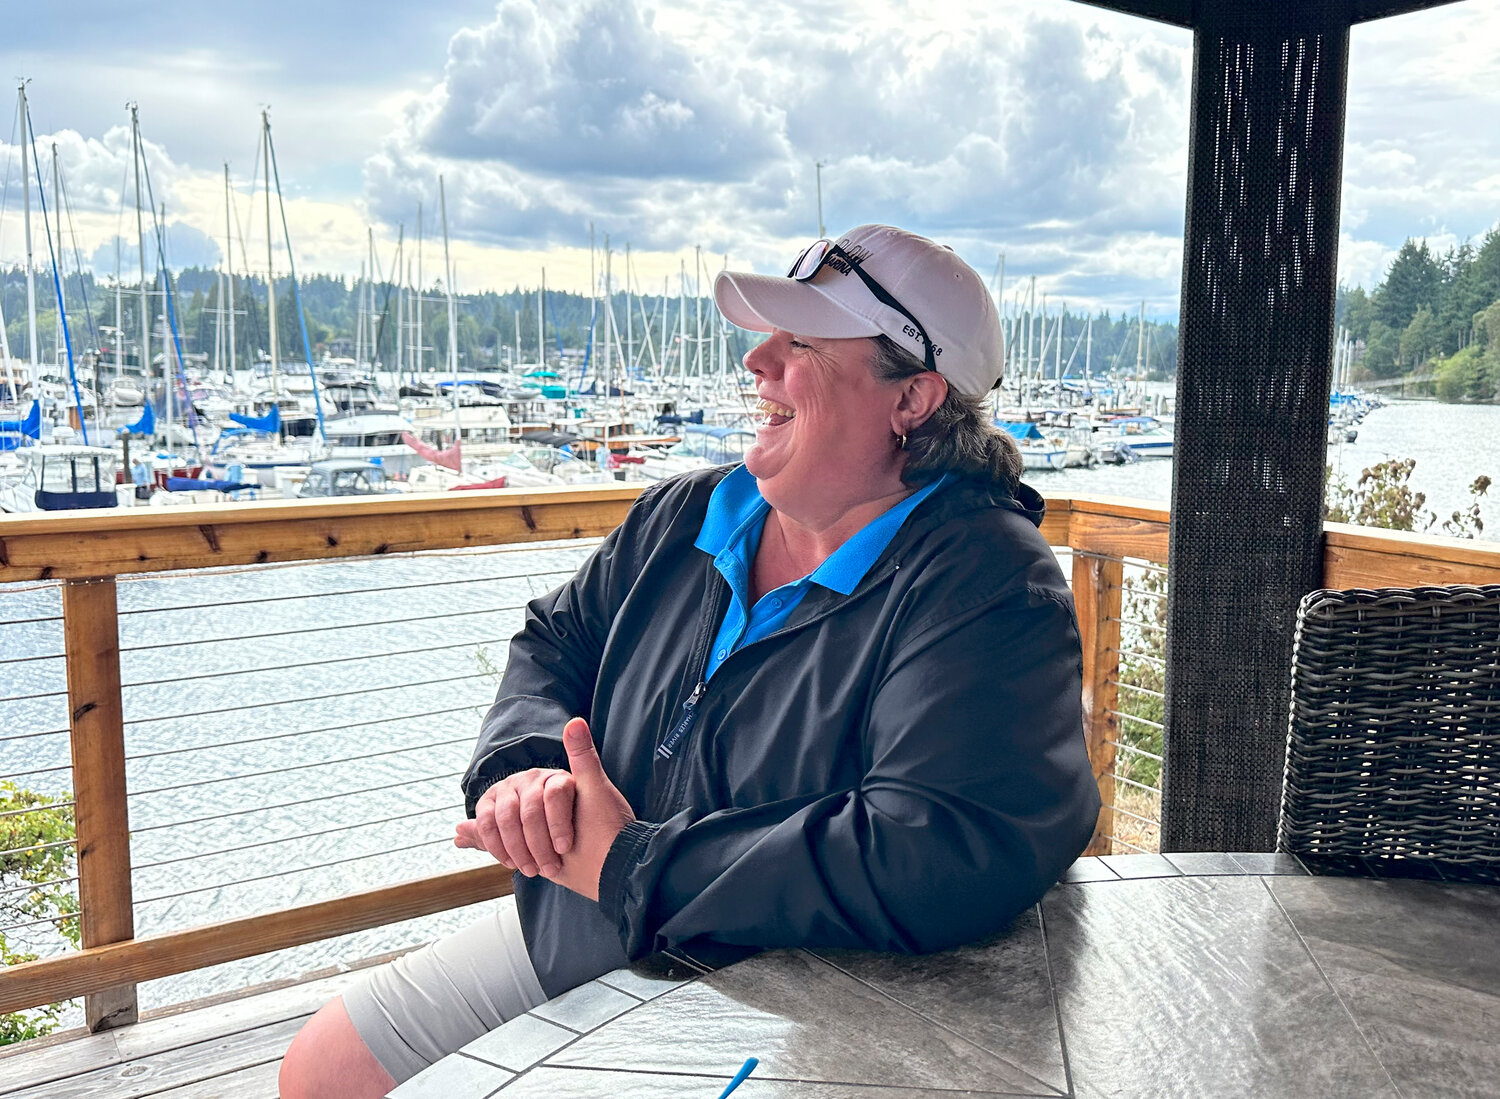 Port Ludlow Marina Manager Kori Ward enjoys her work even after 31 years. Leader photo by Thomas Mullen